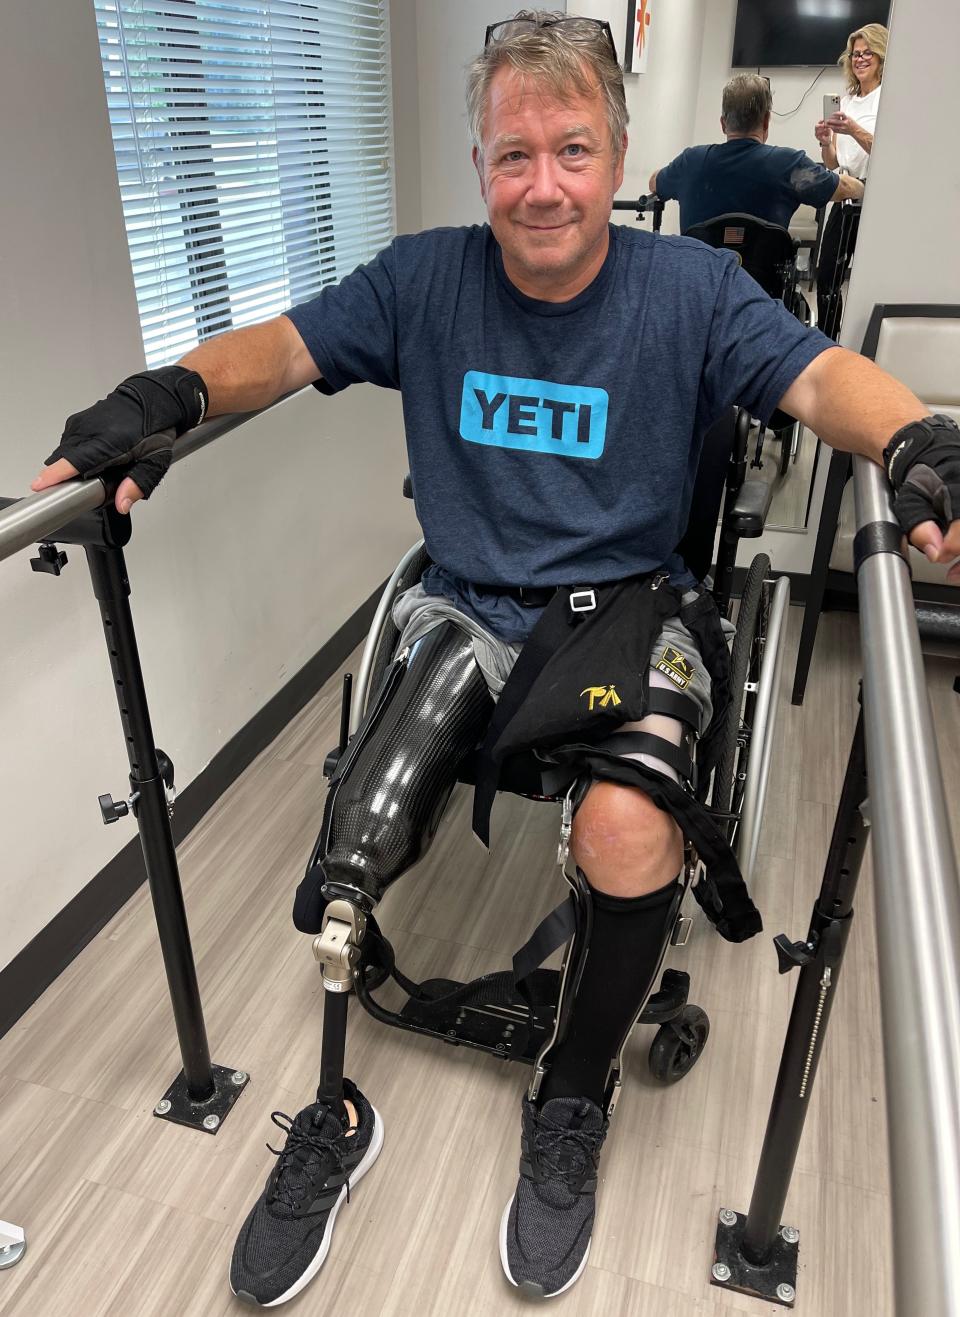 Scott Spitnale getting fitted for a new prosthetic in August 2022 at the Hanger Clinic in Towson, Md. The reflection of his wife, Laura, can be seen in the mirror.